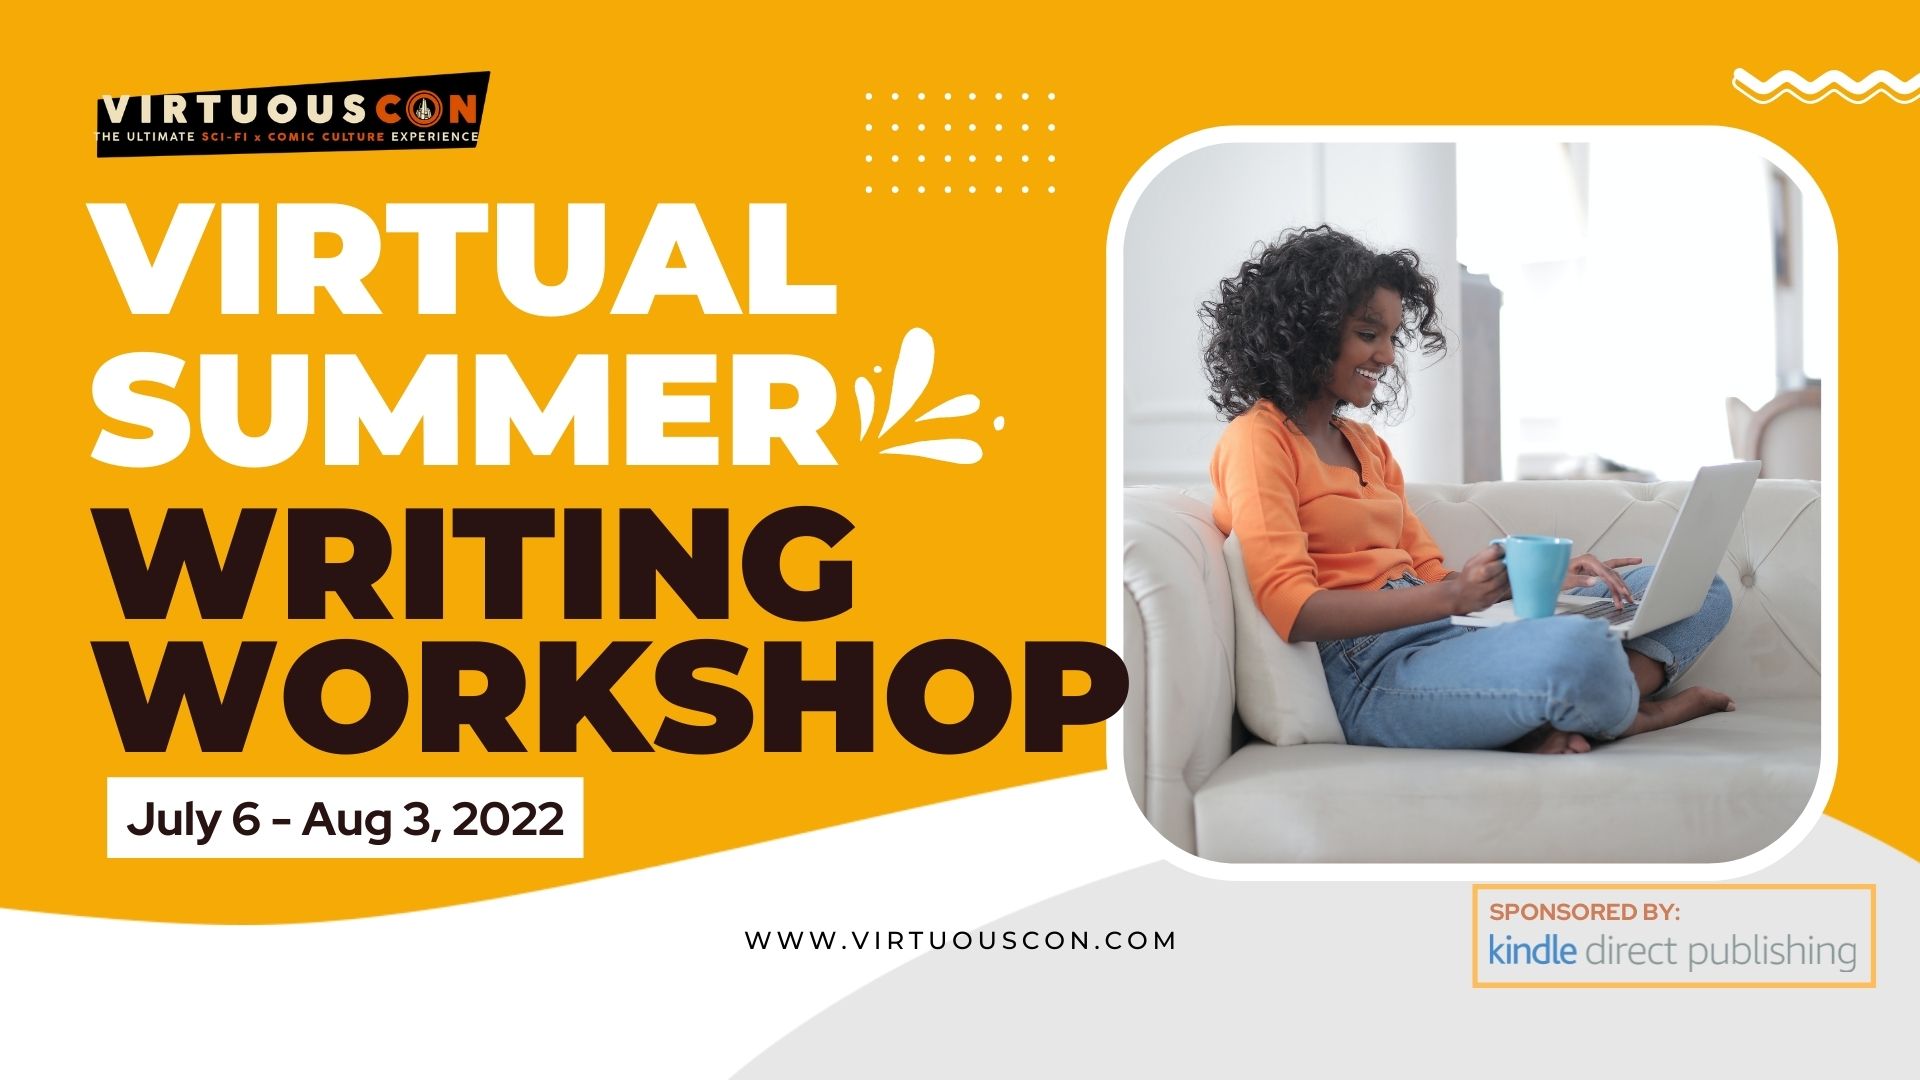 Virtuous Con Launches New Writers Workshop Series For Aspiring Creators